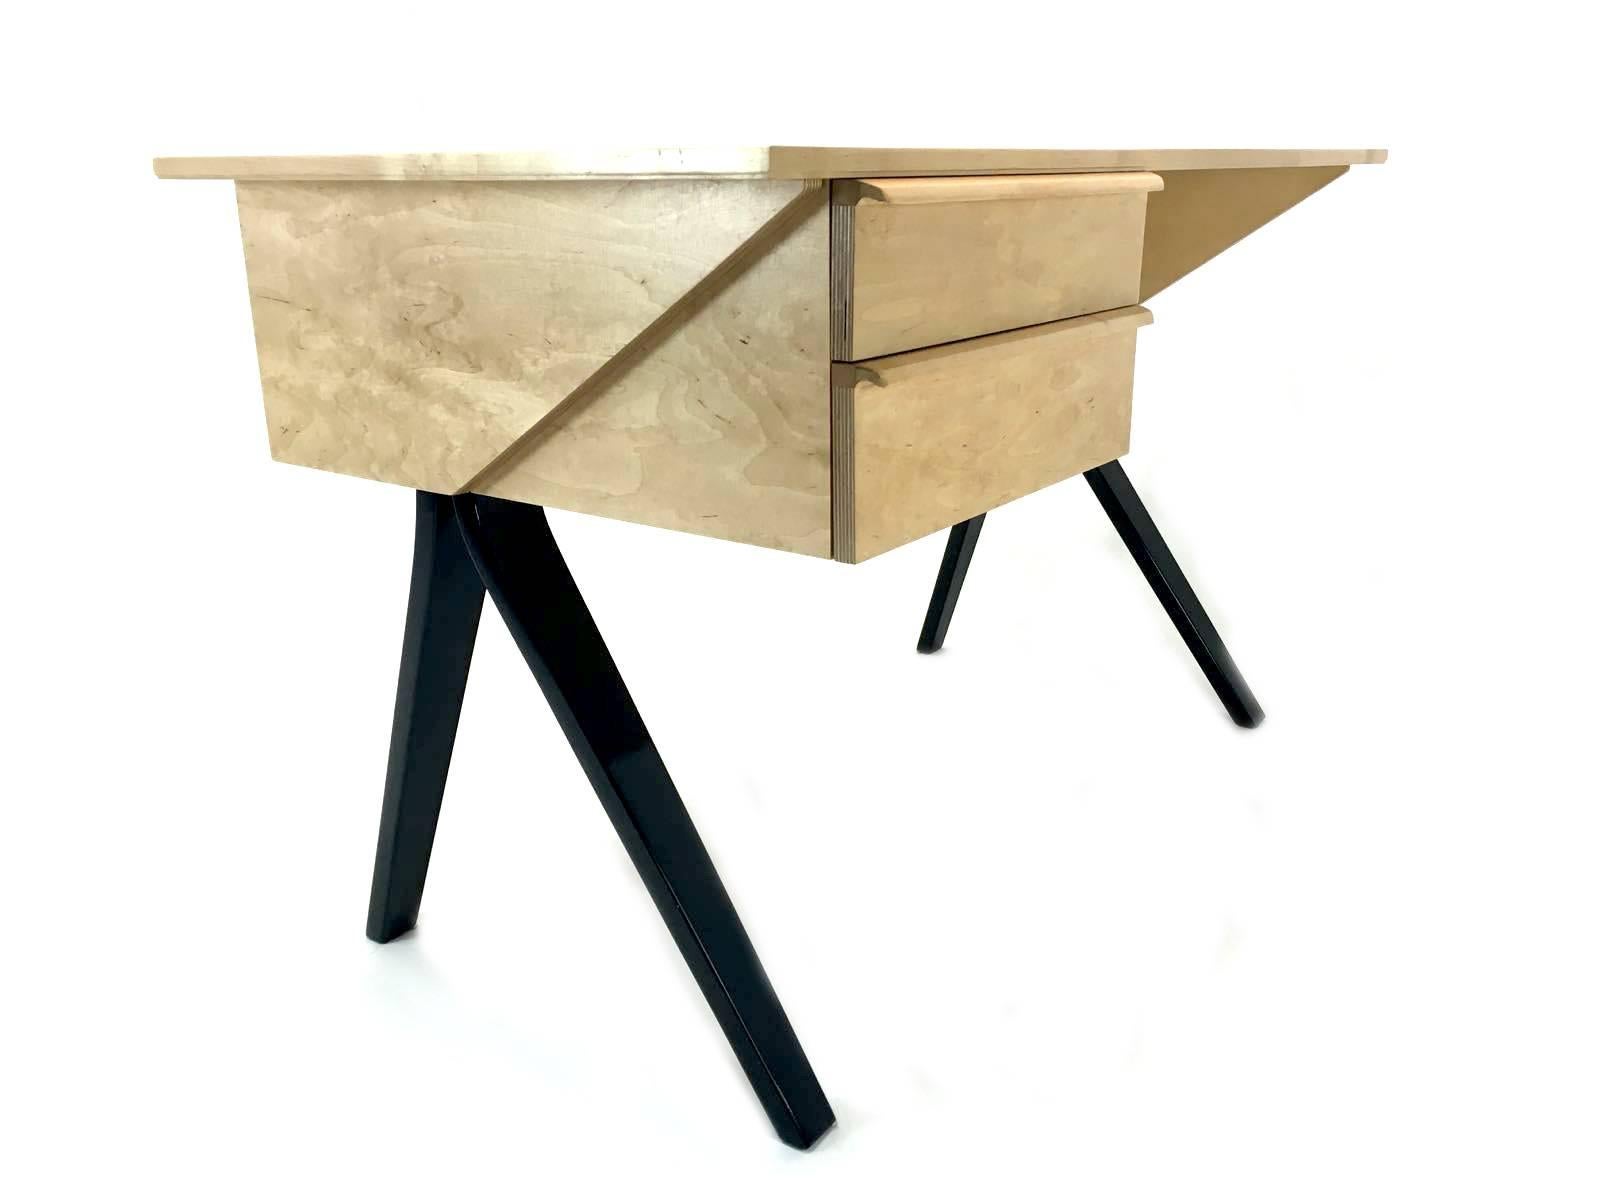 This model EB02 birchwood writing desk was designed by Cees Braakman and Adriaan Dekker. It was manufactured by UMS Pastoe in Holland between 1952 and 1954. This edition features black feet and is completely refurbished.

We ship worldwide, do not